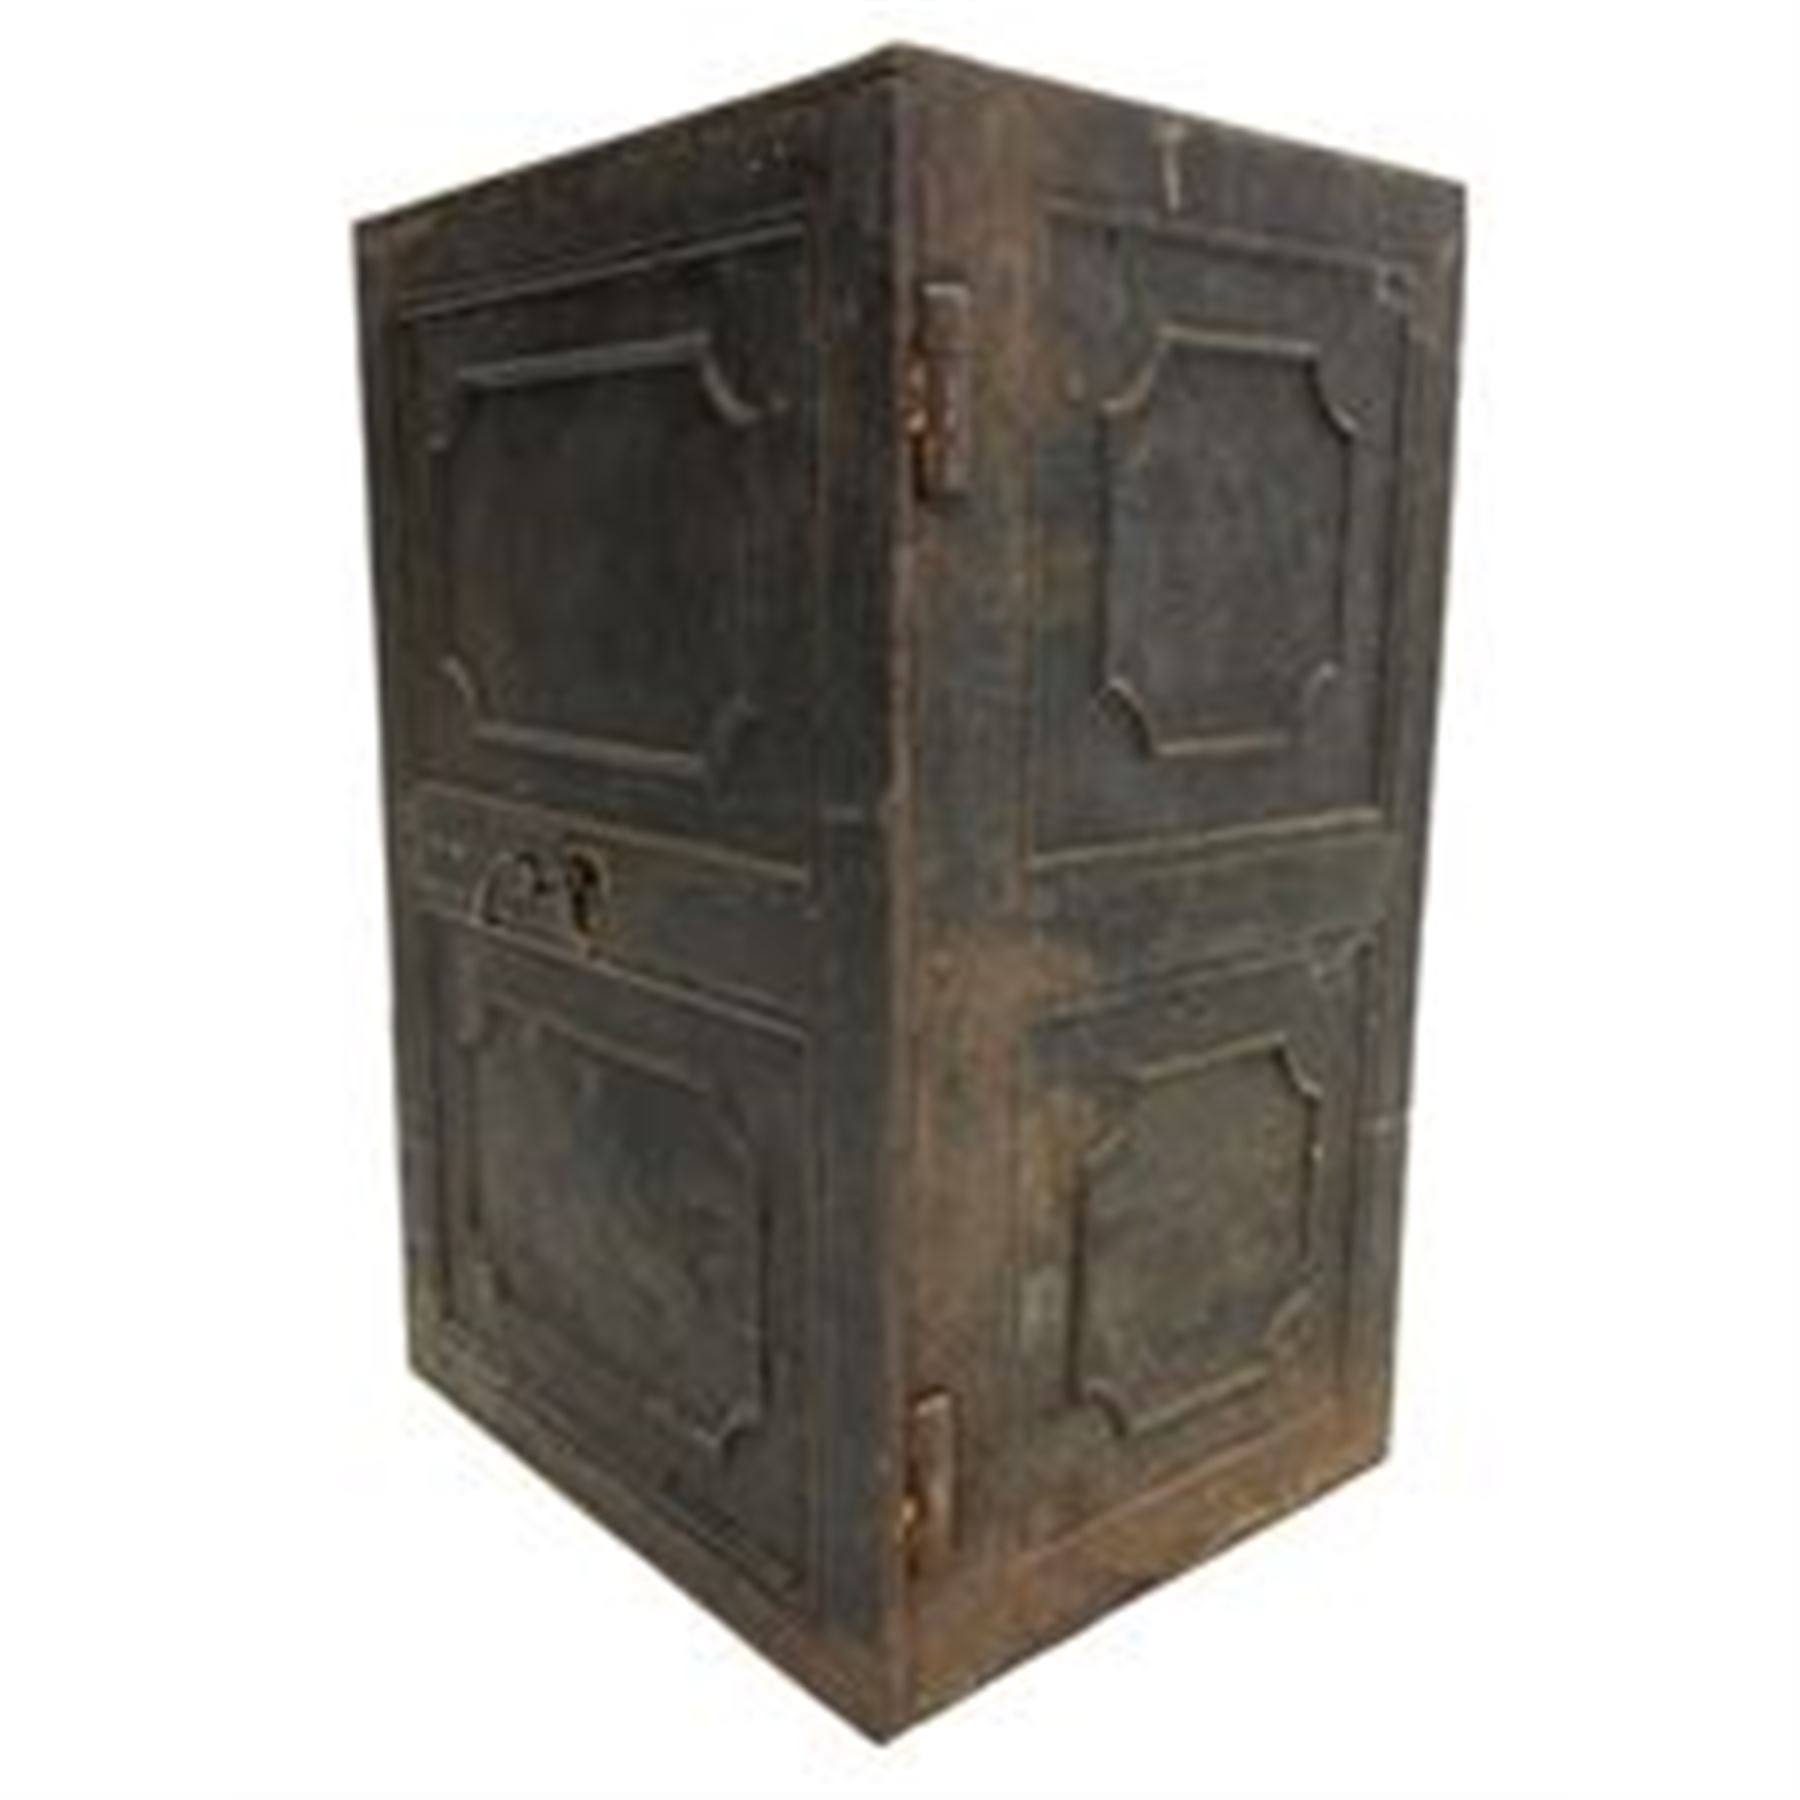 Early 19th century cast iron safe or strong box - Image 2 of 5